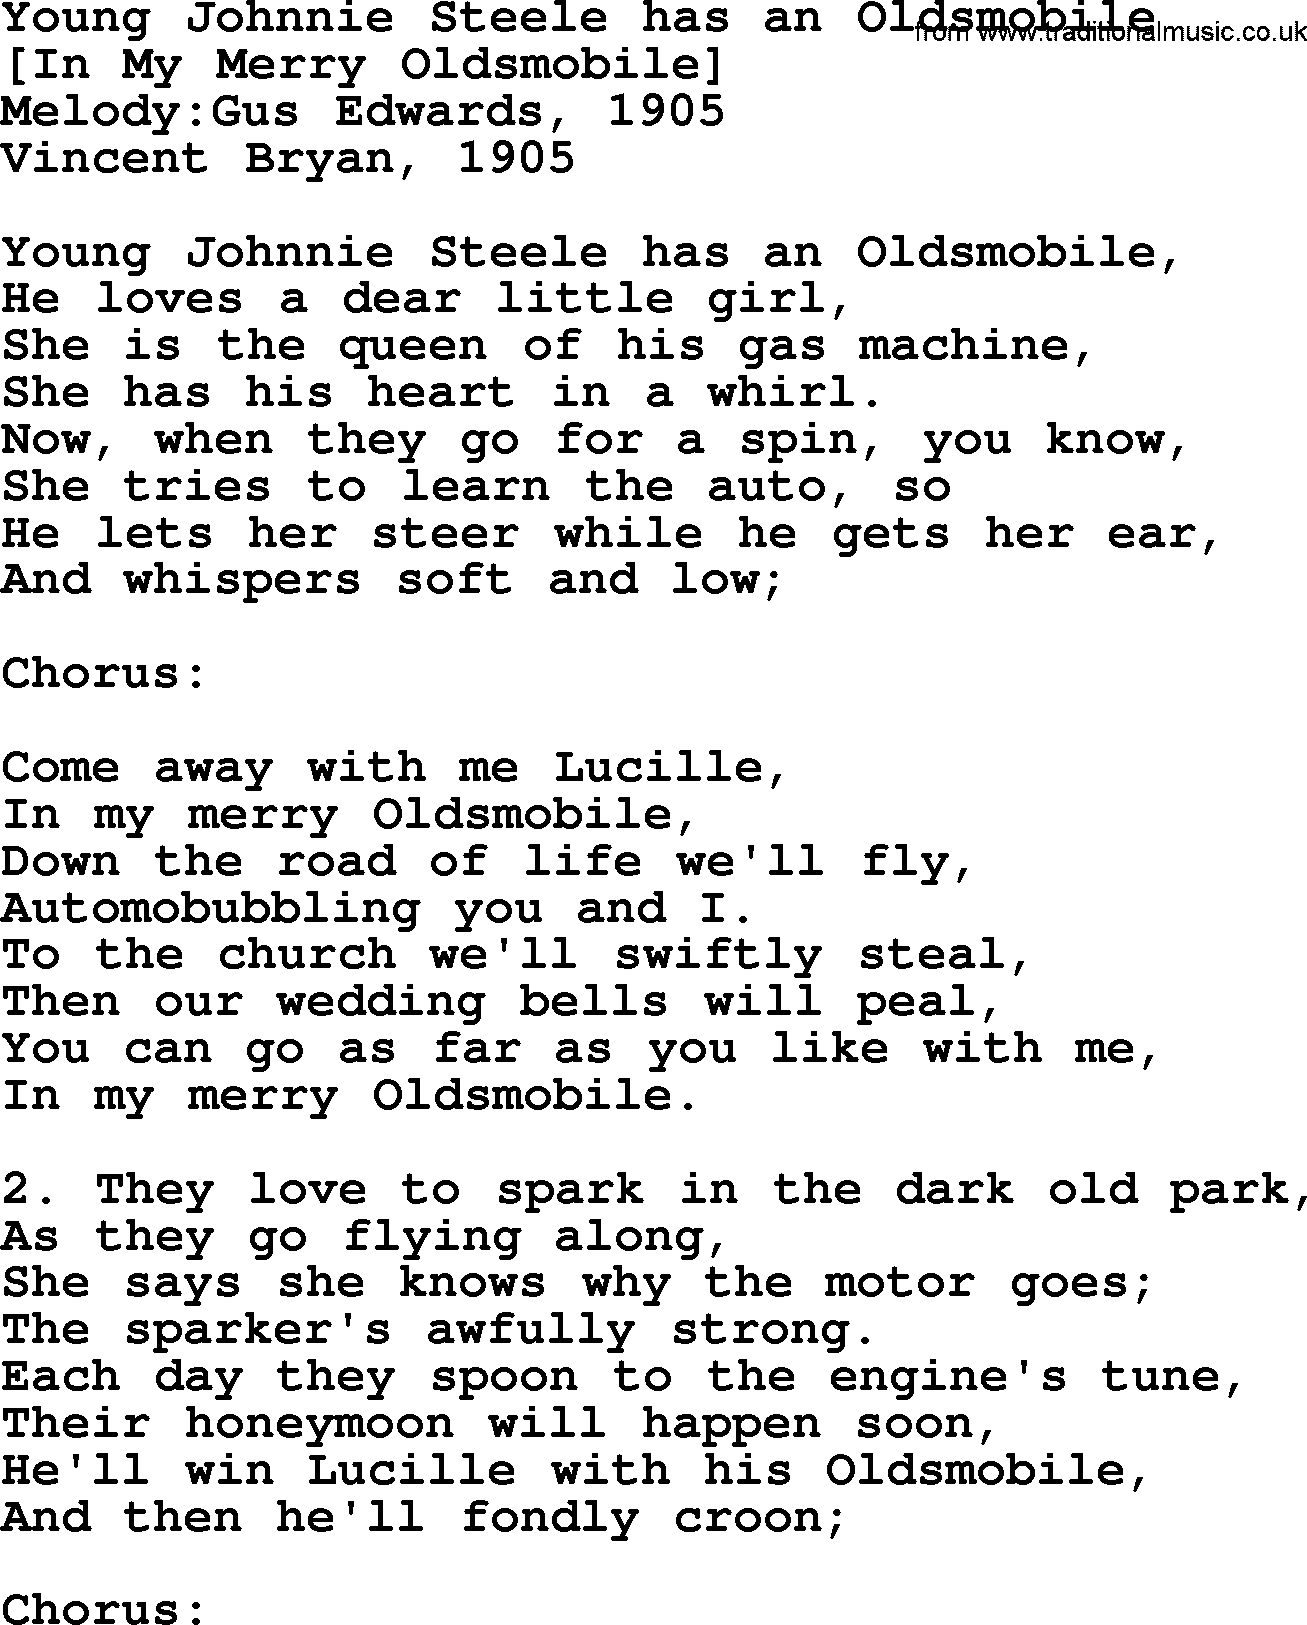 Old American Song: Young Johnnie Steele Has An Oldsmobile, lyrics